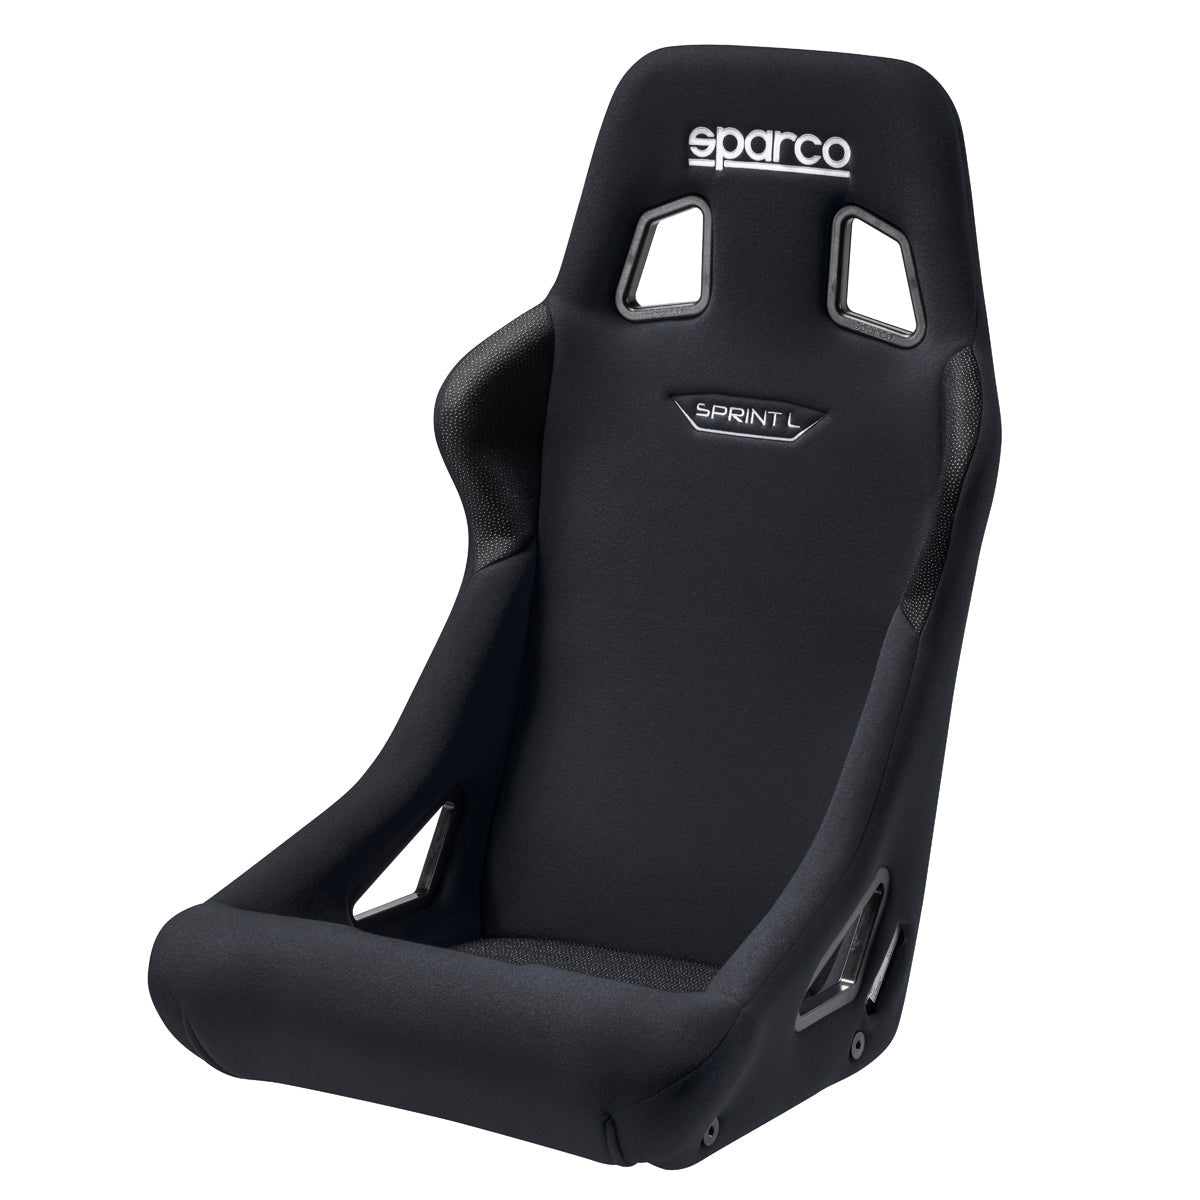 Seat padding kit from Sparco, Sparco